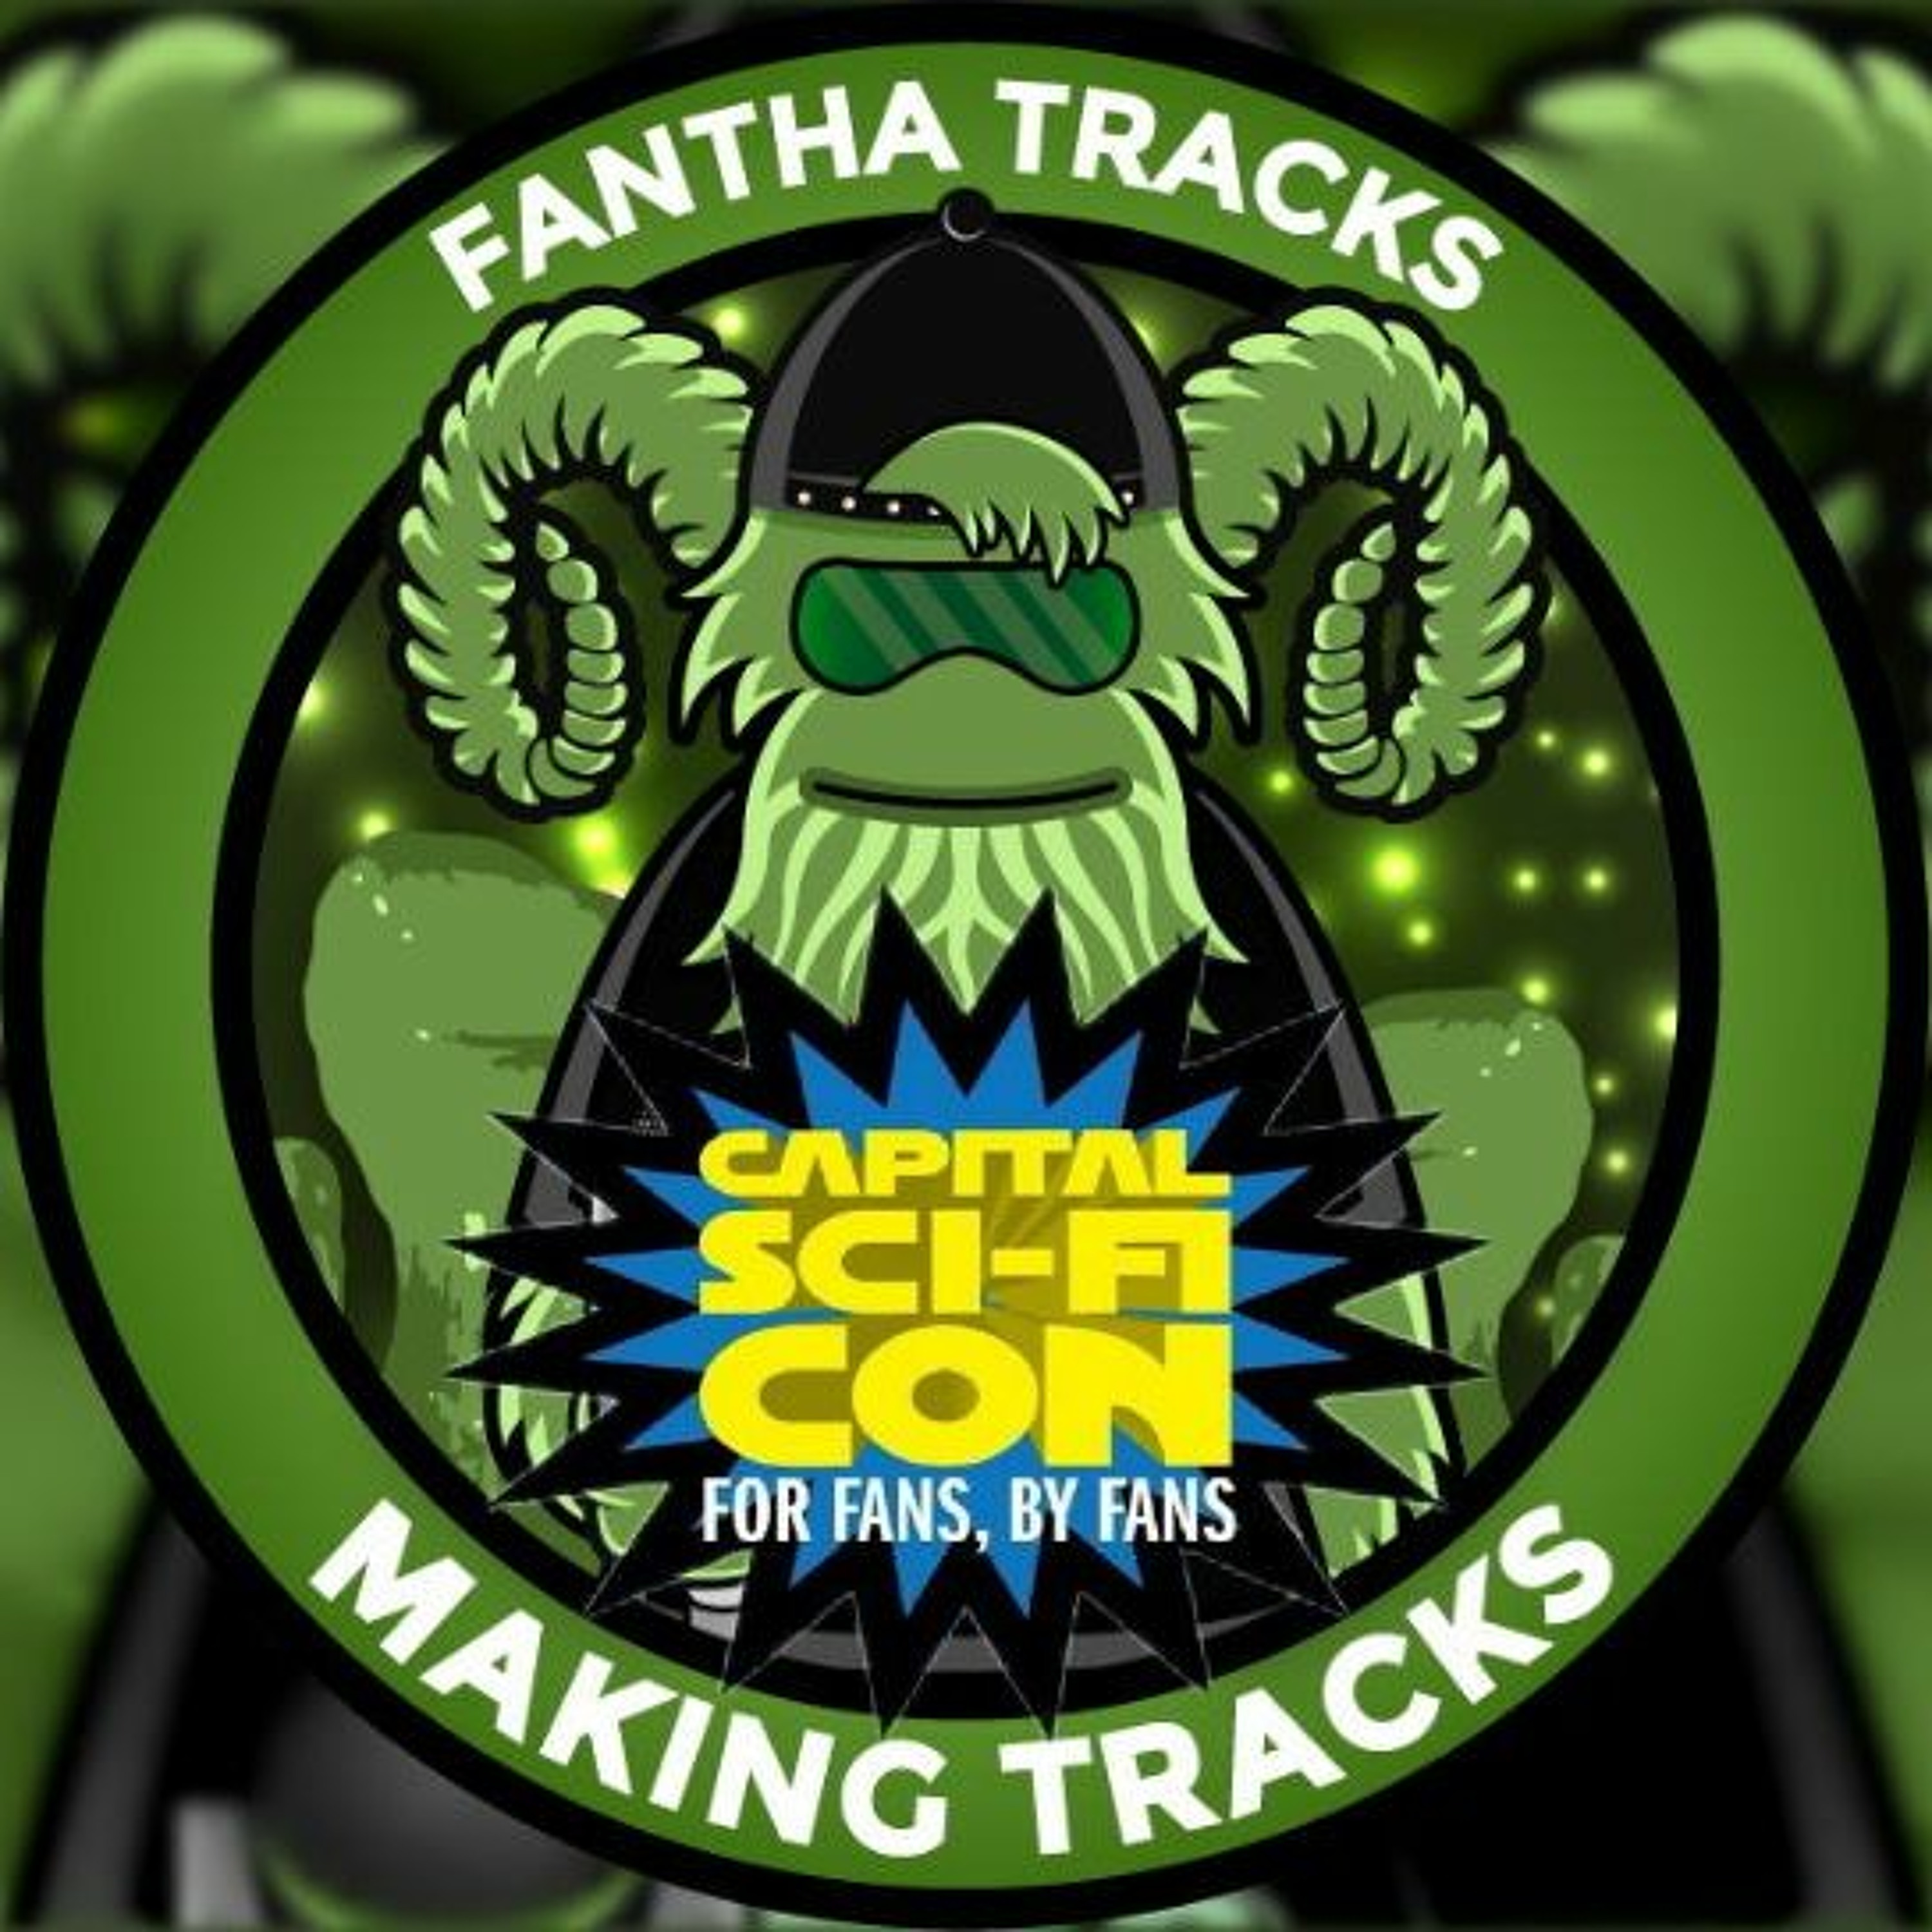 Making Tracks at Capital Sci-Fi 2019: Star Wars New Ages Panel